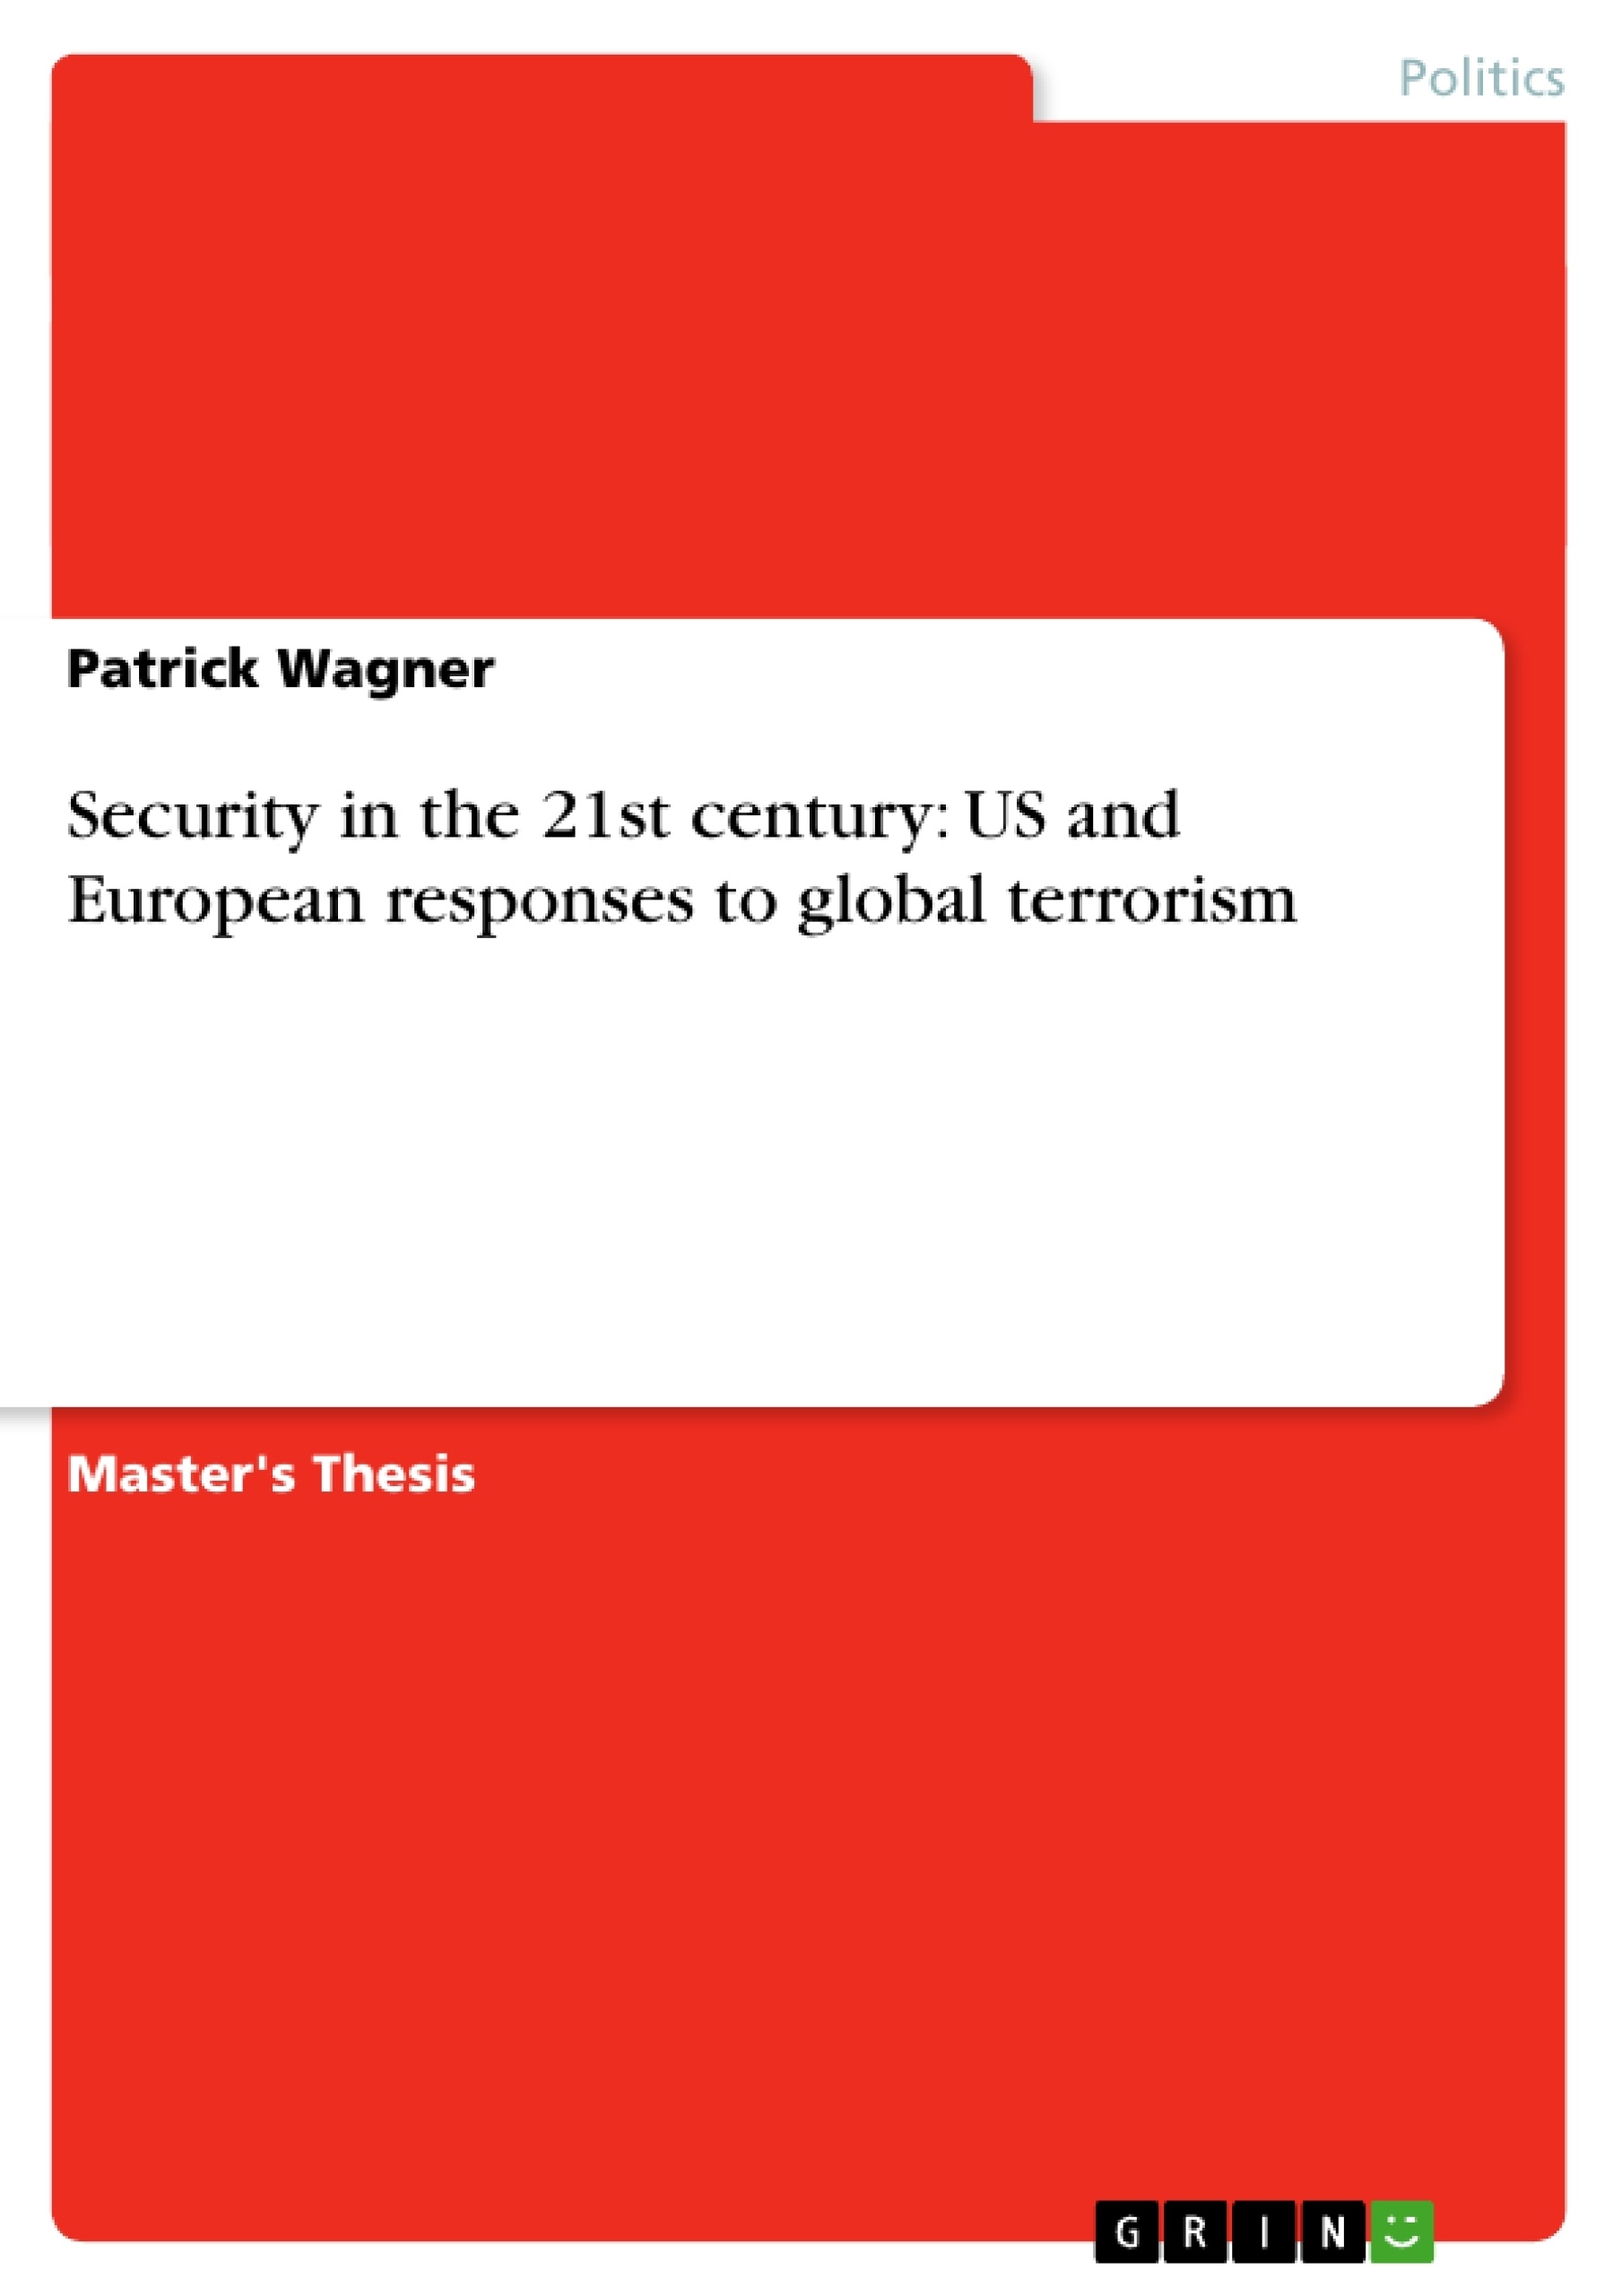 Title: Security in the 21st century: US and European responses to global terrorism